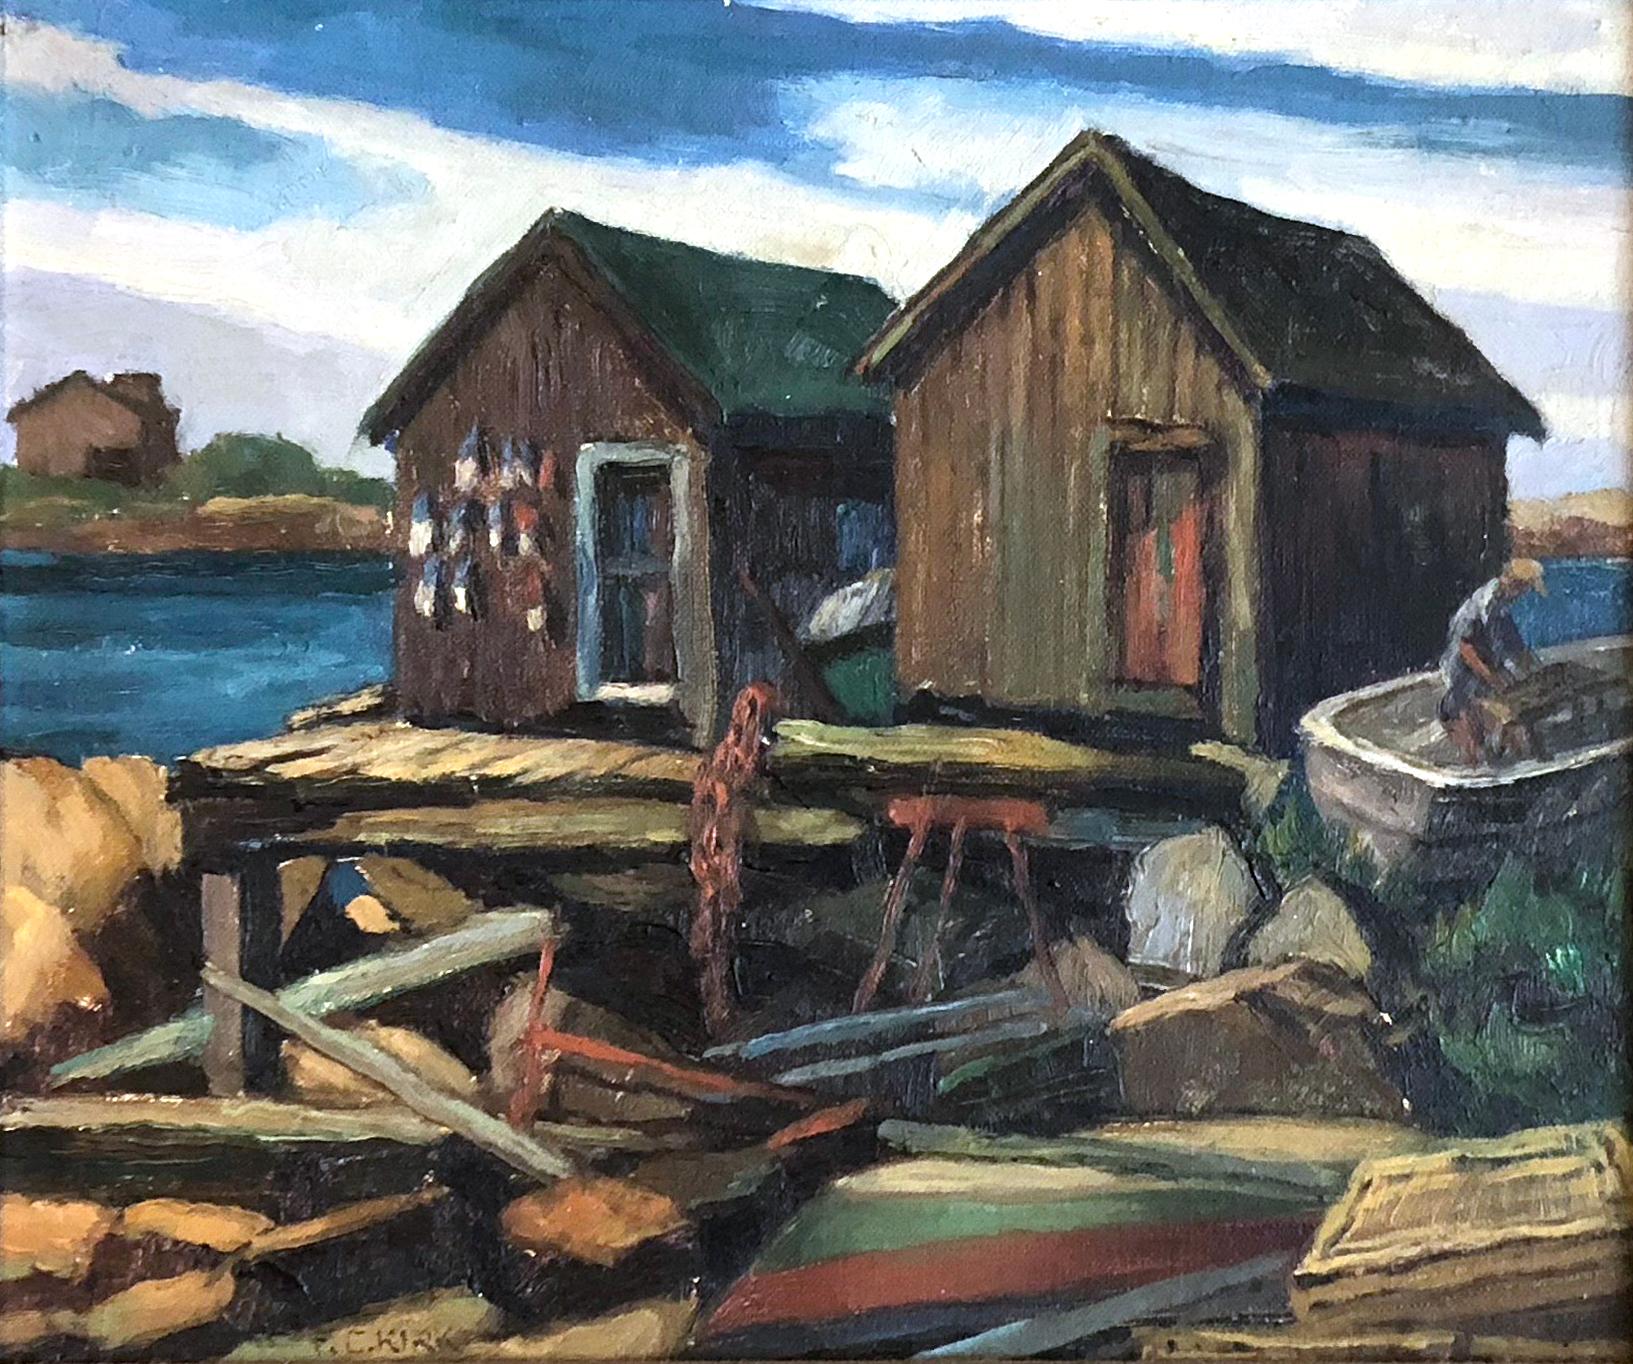 Fishing Shacks on Star Island, New Hampshire - Painting by Frank Cohen Kirk